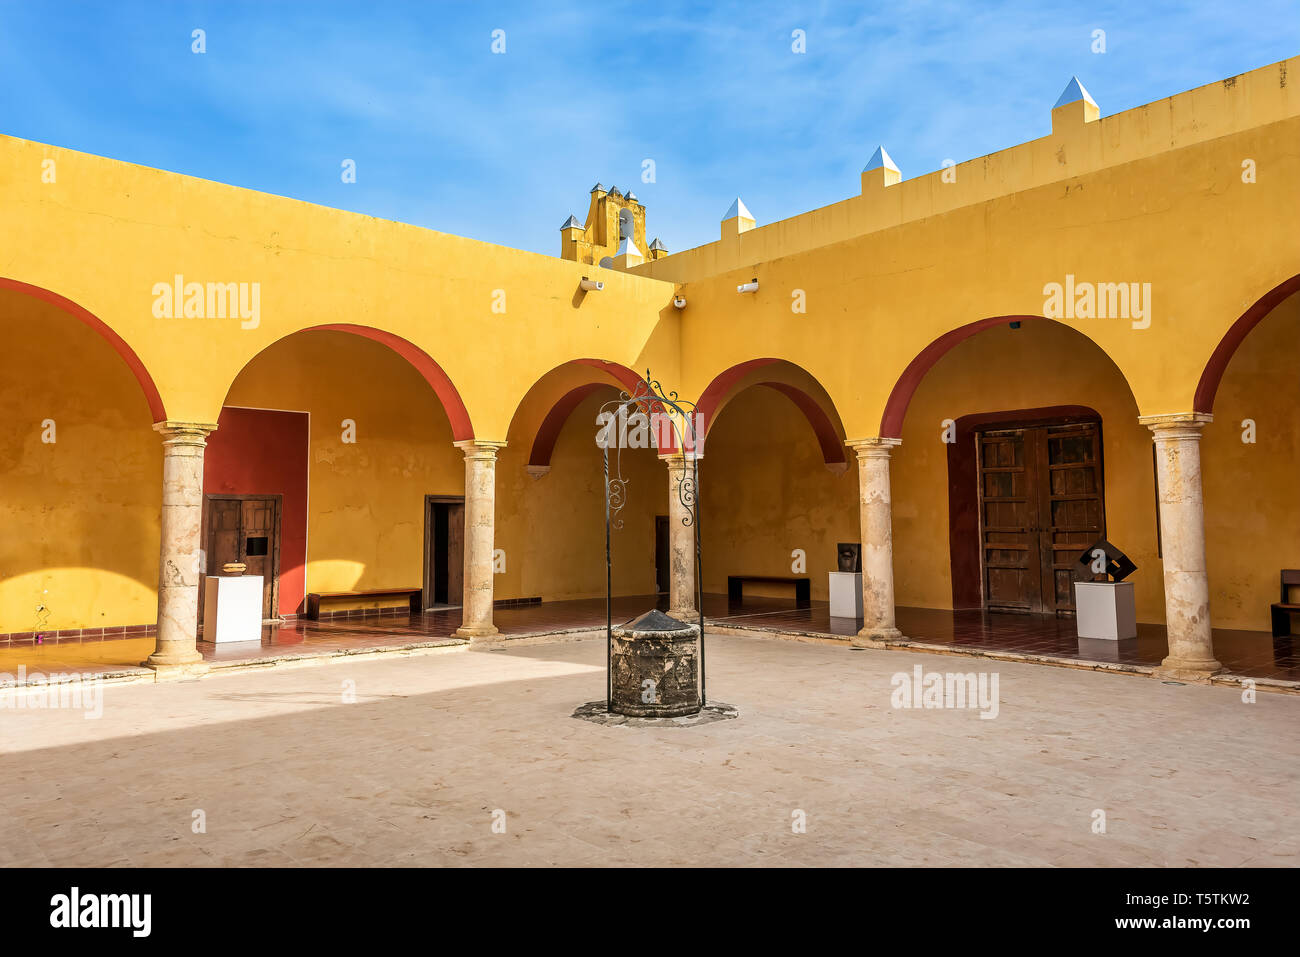 Vivid yellow colonnade under blue skies in Mexico Stock Photo